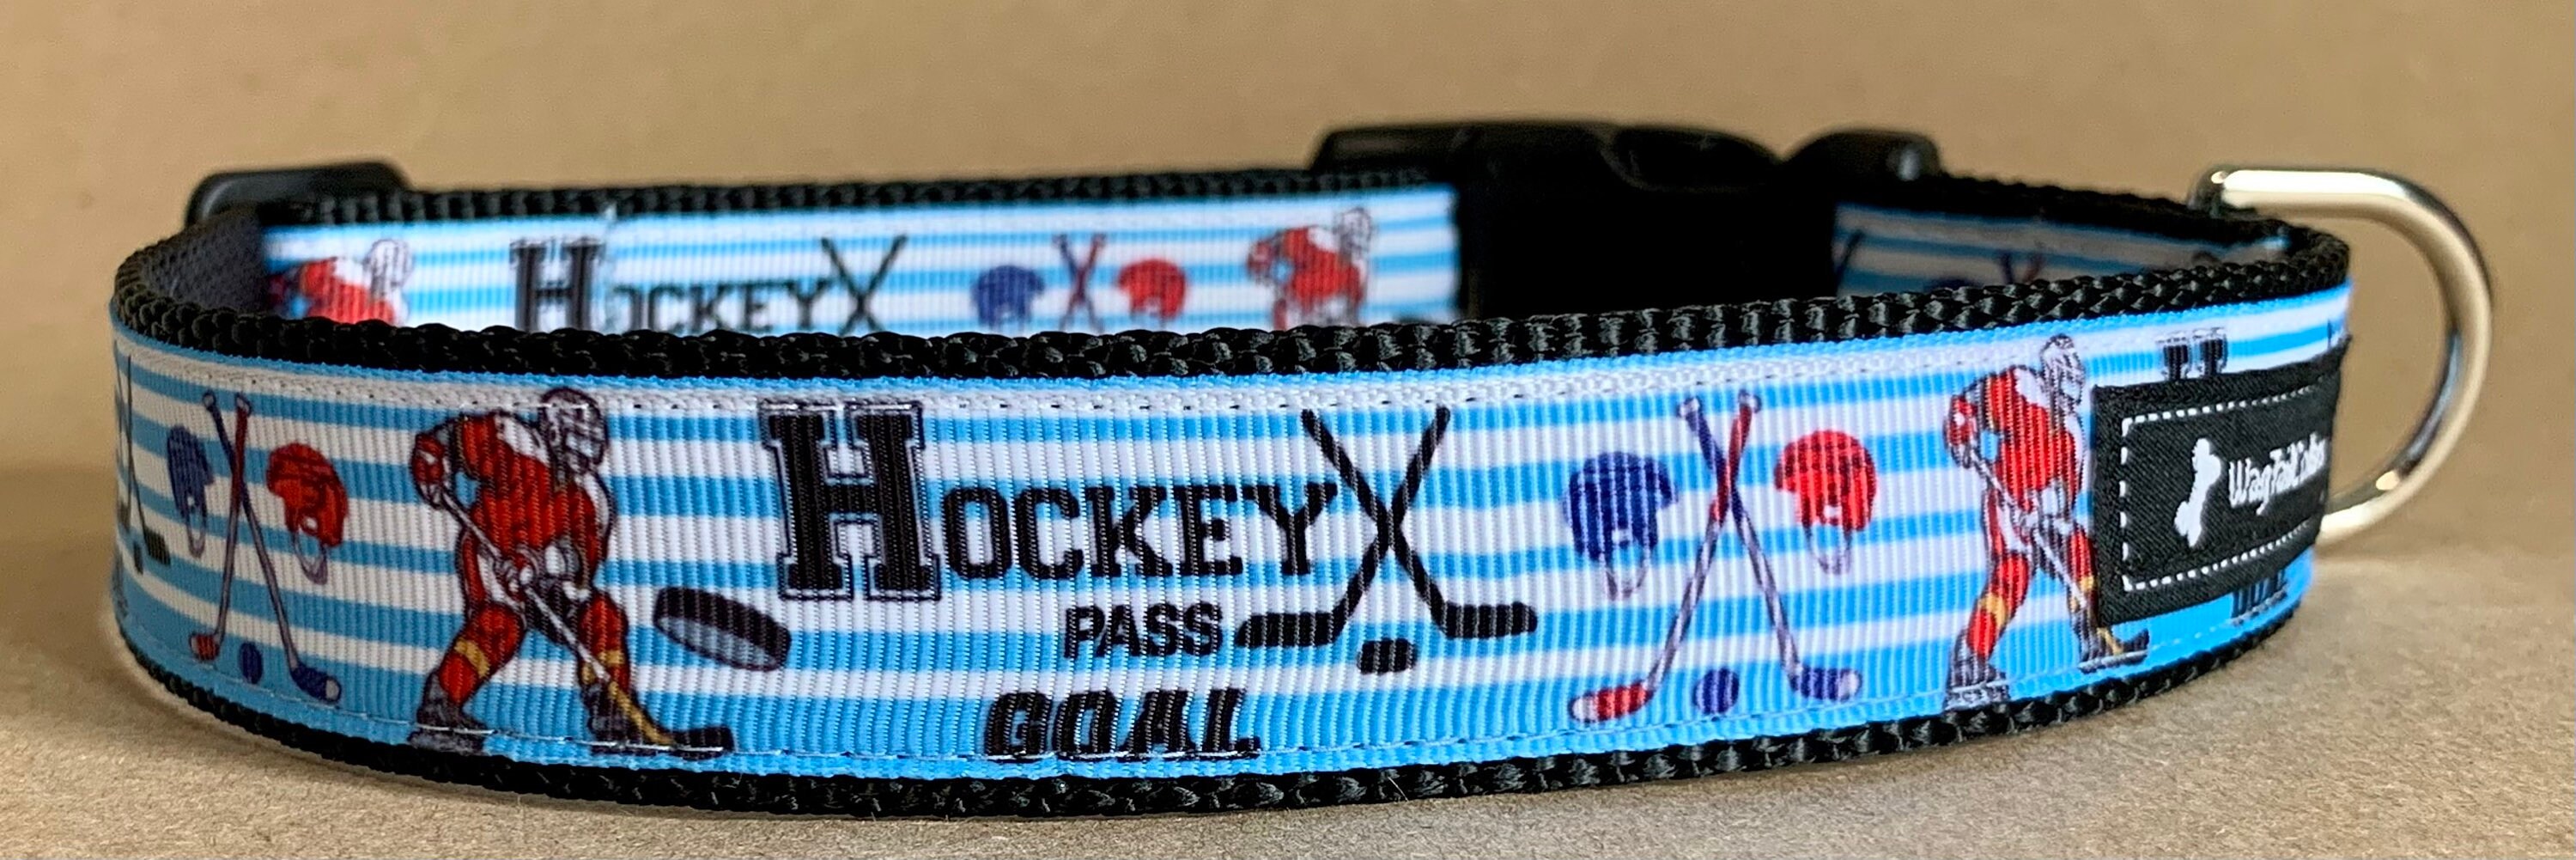  Pets First Dog Collar - NHL Seattle Kraken PET Collar, Size:  Medium. - A Cool, Cute, Fashionable, Adjustable, Durable Collar for Dogs &  Cats Looking to Support Their Hockey Team!